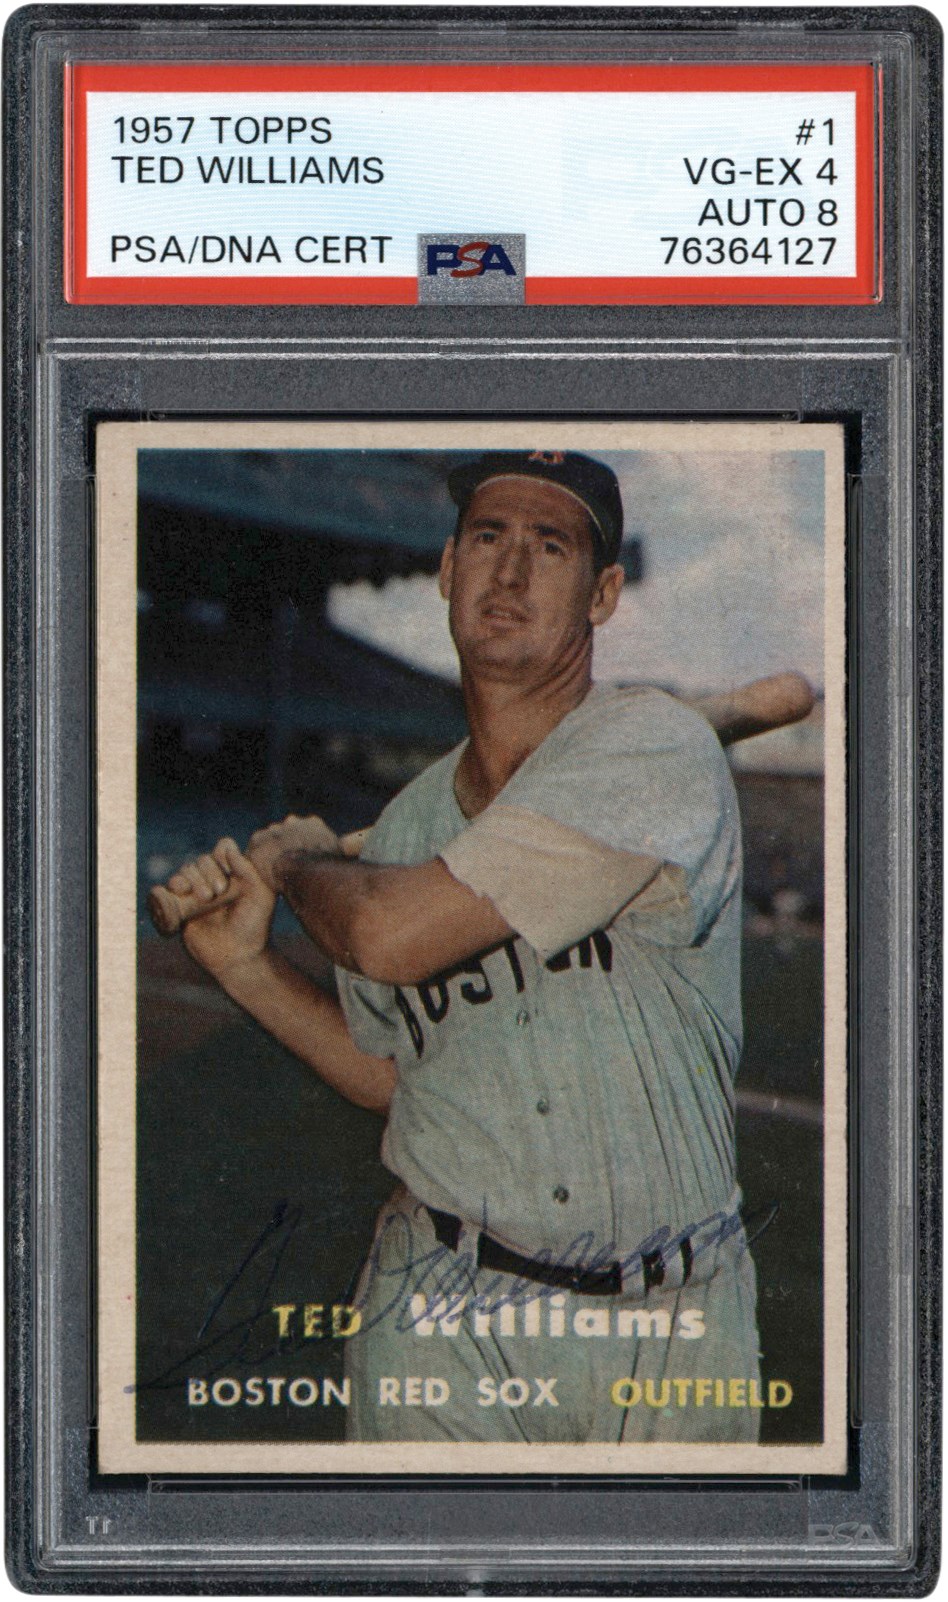 - Signed 1957 Topps #1 Ted Williams Card PSA VG-EX 4 Auto 8 (Pop 1 - Three Higher)